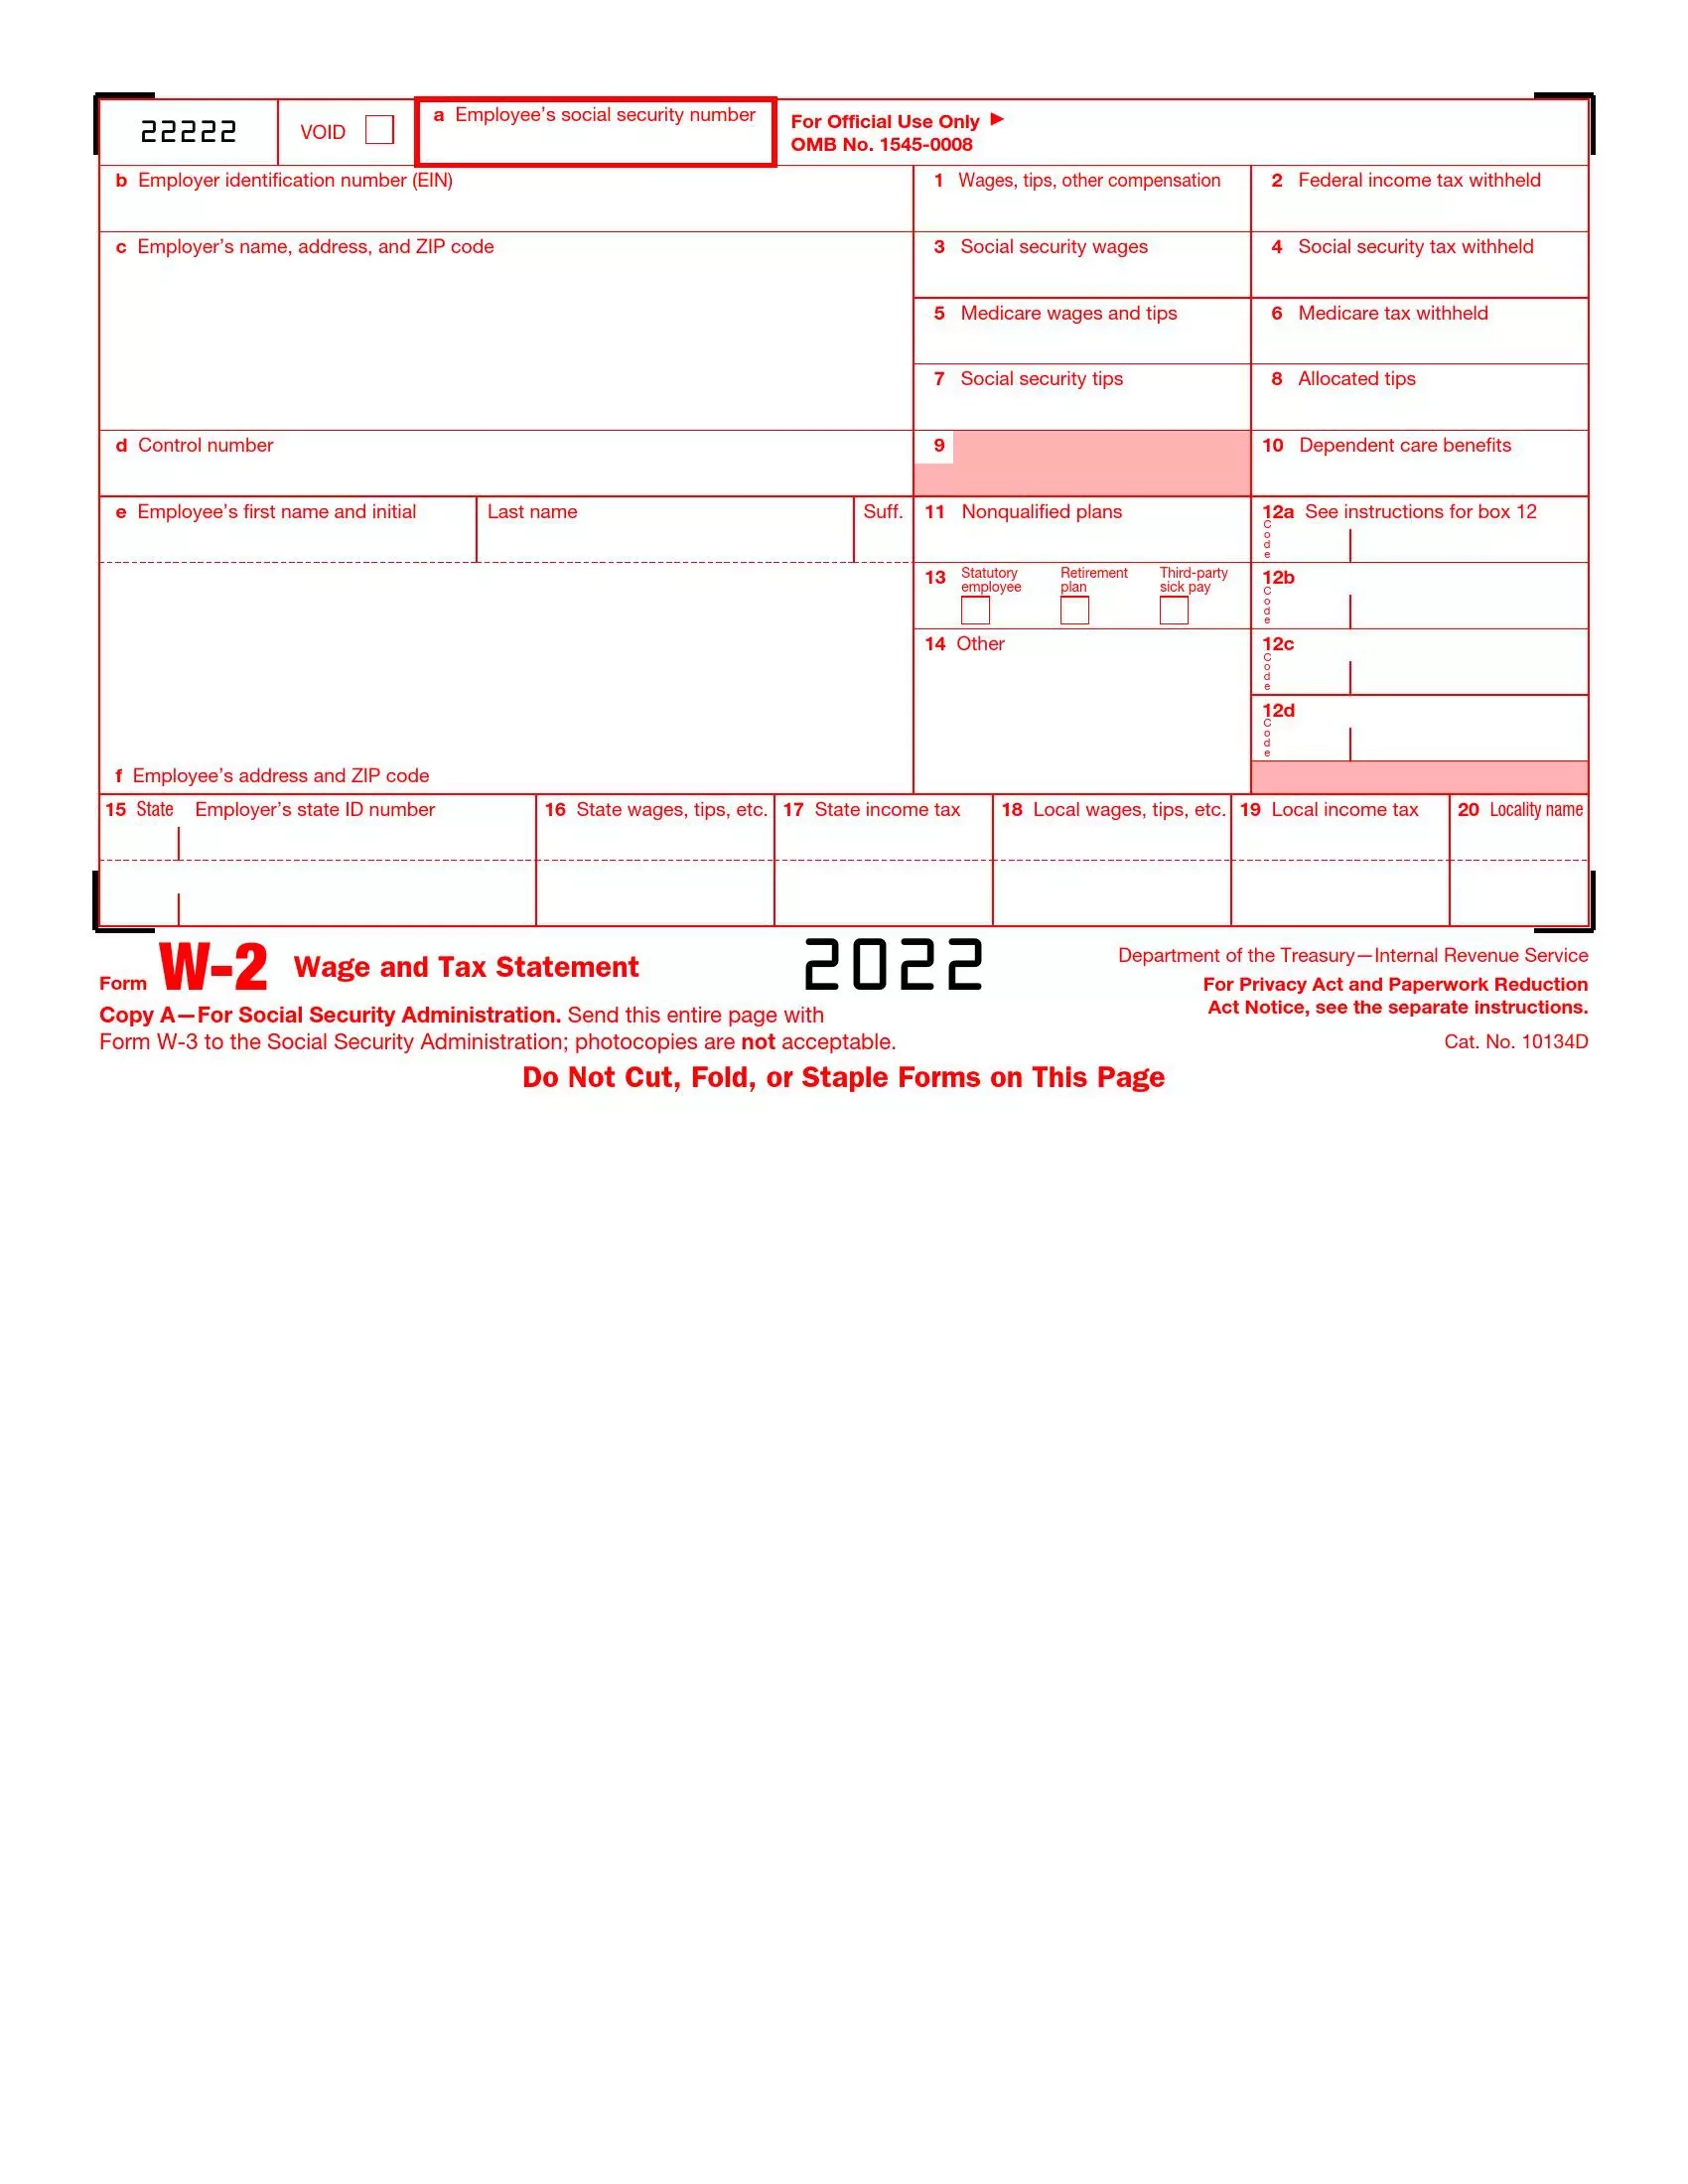 Irs Form W-2 ≡ Fill Out Printable Pdf Forms Online regarding How Do I Print W2 Forms